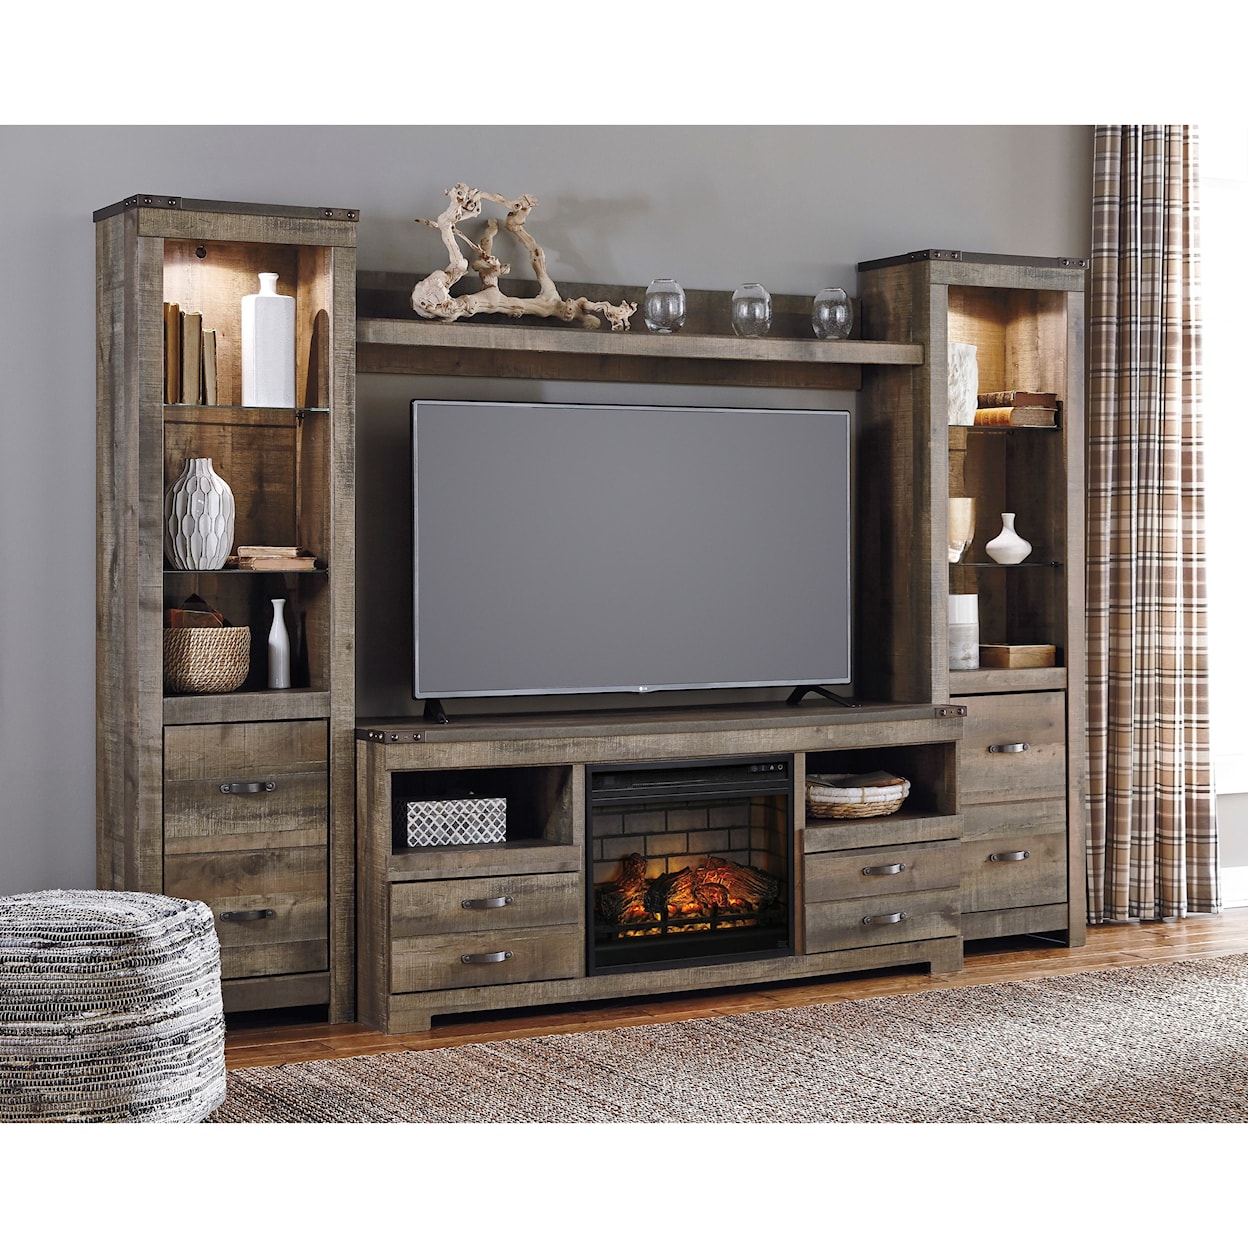 Signature Design by Ashley Trinell Large TV Stand w/ Fireplace, Piers, & Bridge